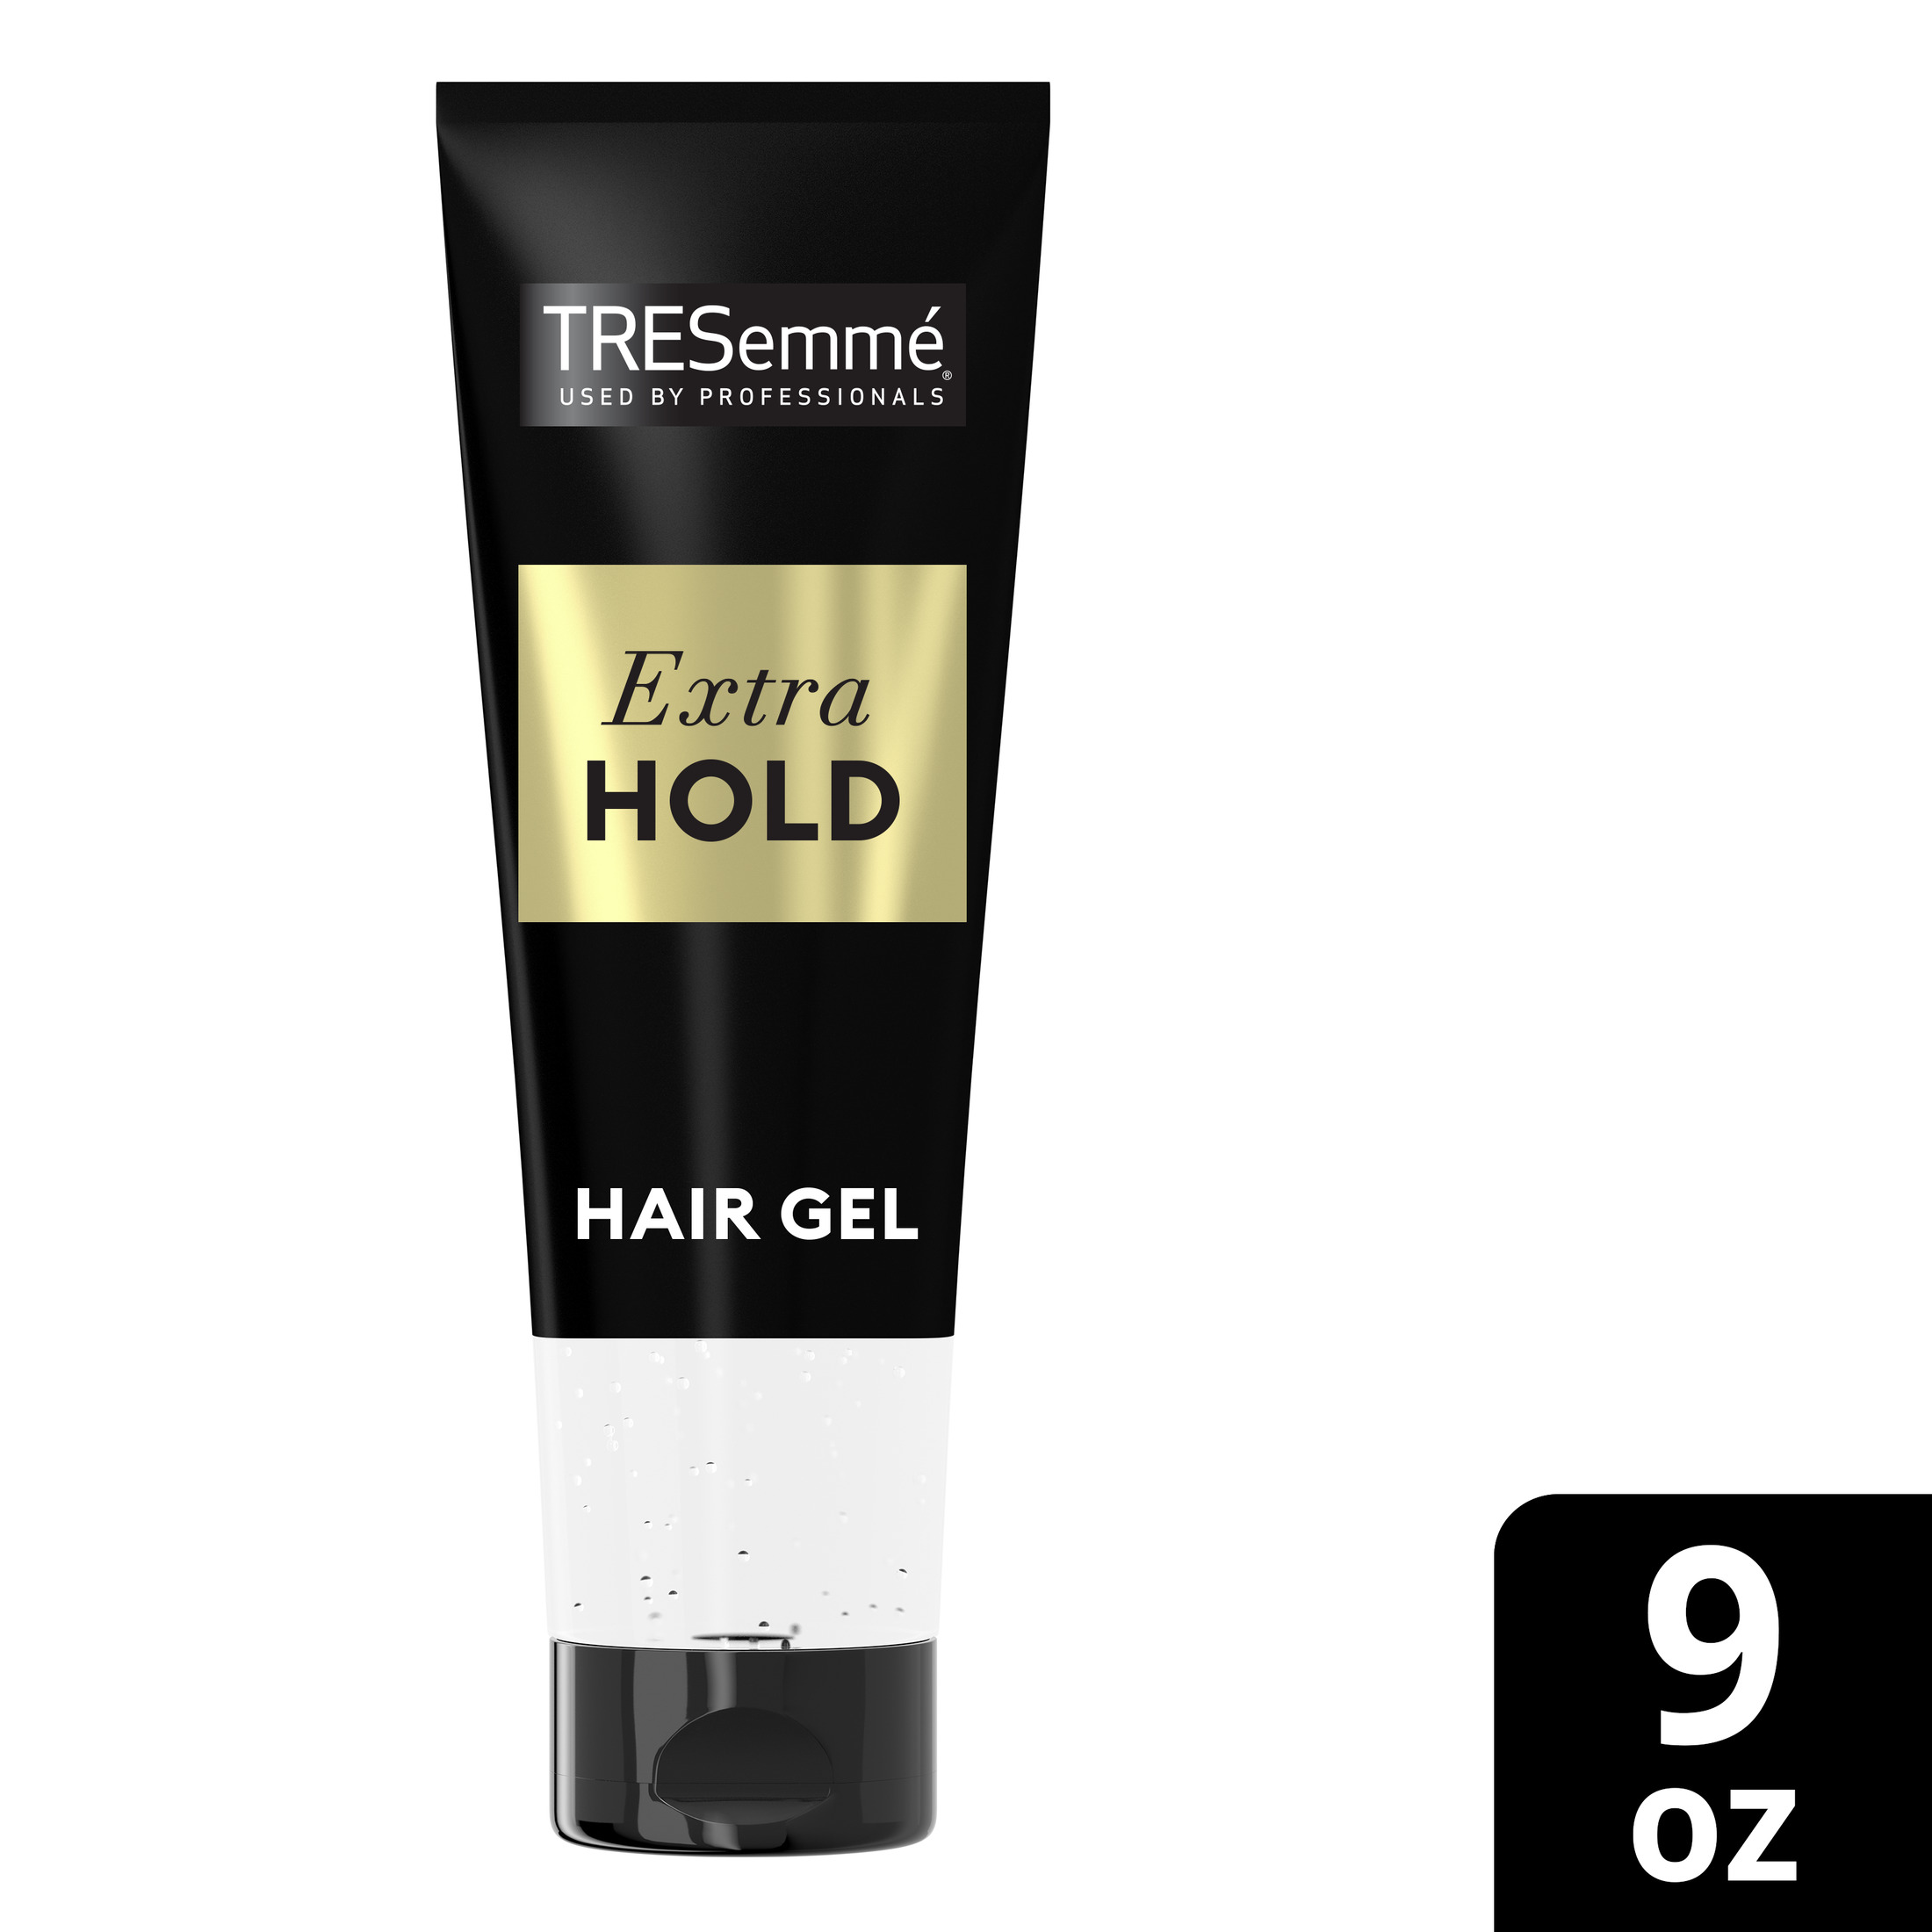 TRESemme Extra Hold Frizz Control Hair Styling Gel, 9 oz - image 2 of 9